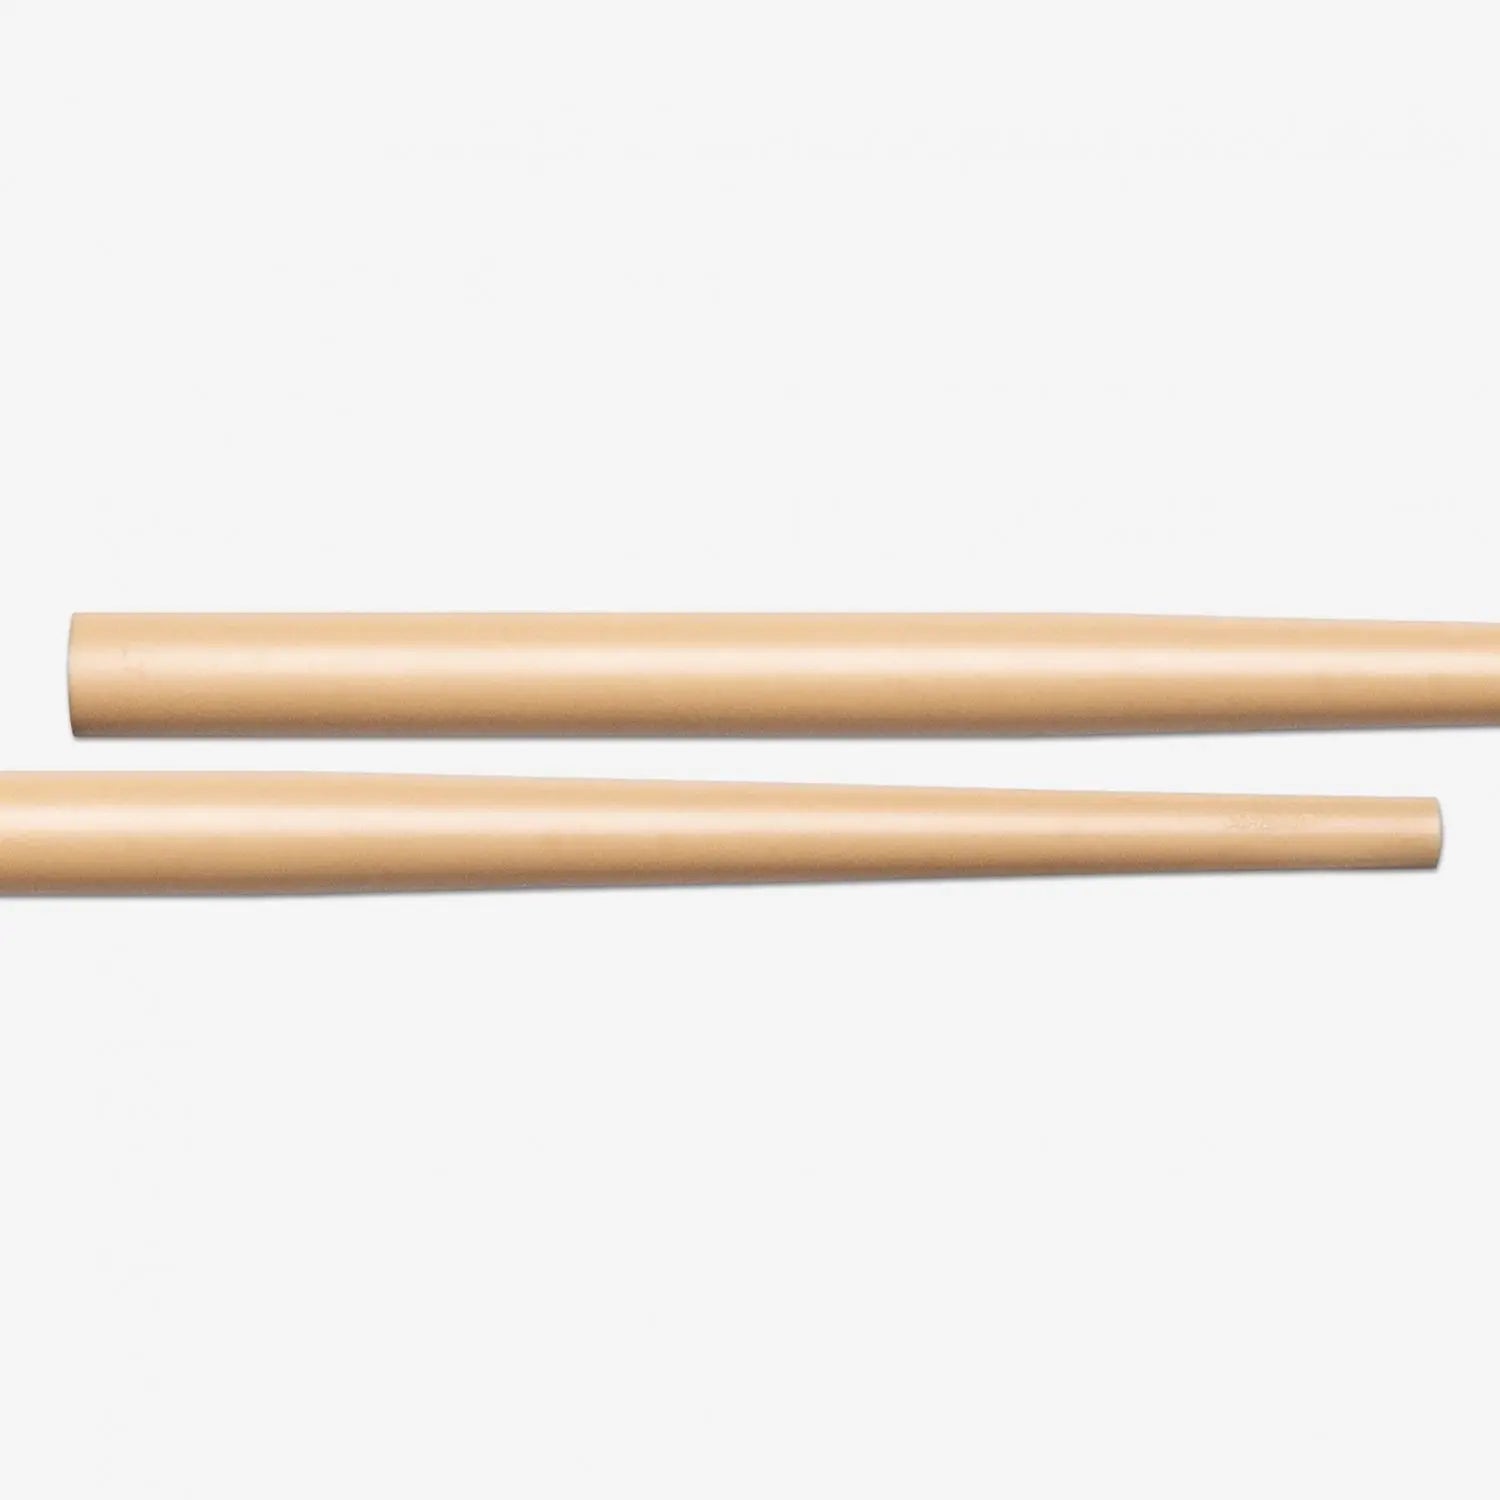 Ahead Drum Sticks Long Taper Replacement Covers, Wood Tone (WLT) DRUM STICKS Ahead 